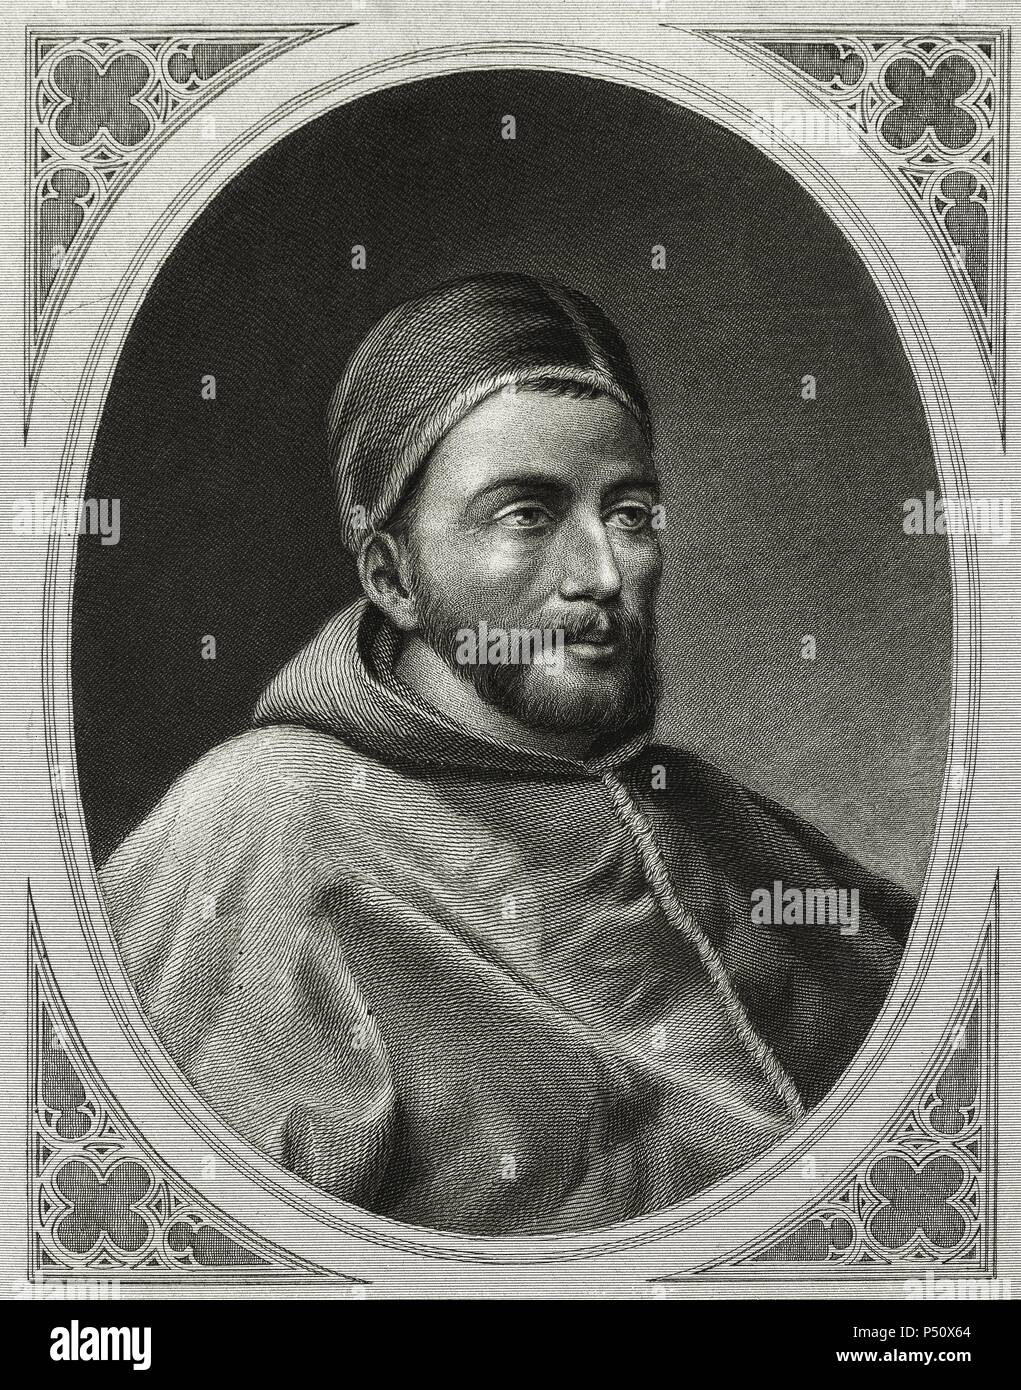 Clement VII (1342-1394). Pope of the Roman Catholic Church. Engraving, 1882. Stock Photo